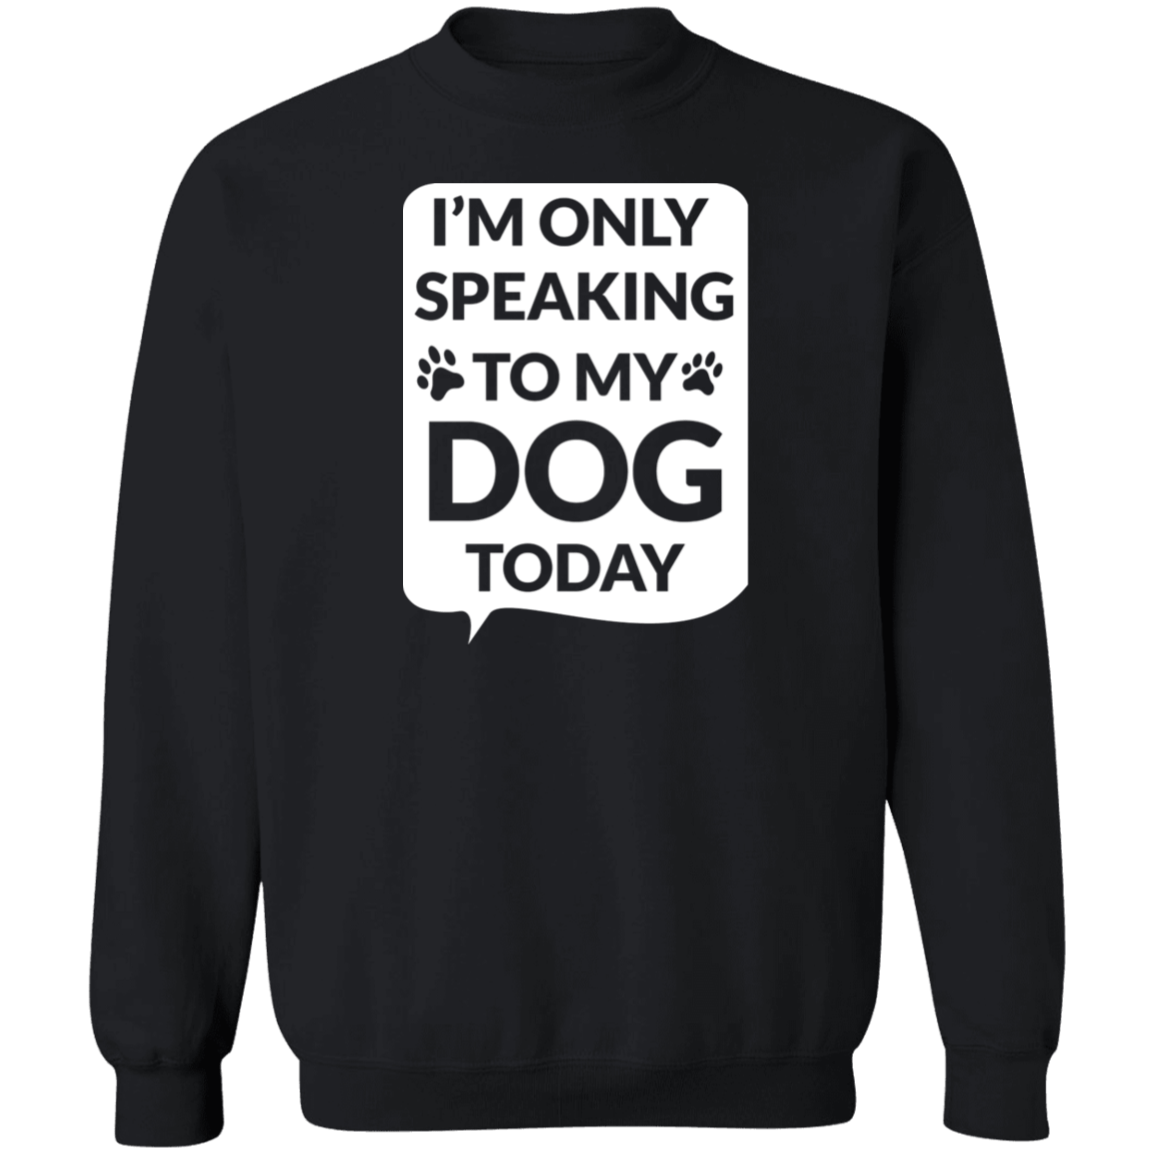 I'm Only Speaking To My Dog Today - Sweatshirt.